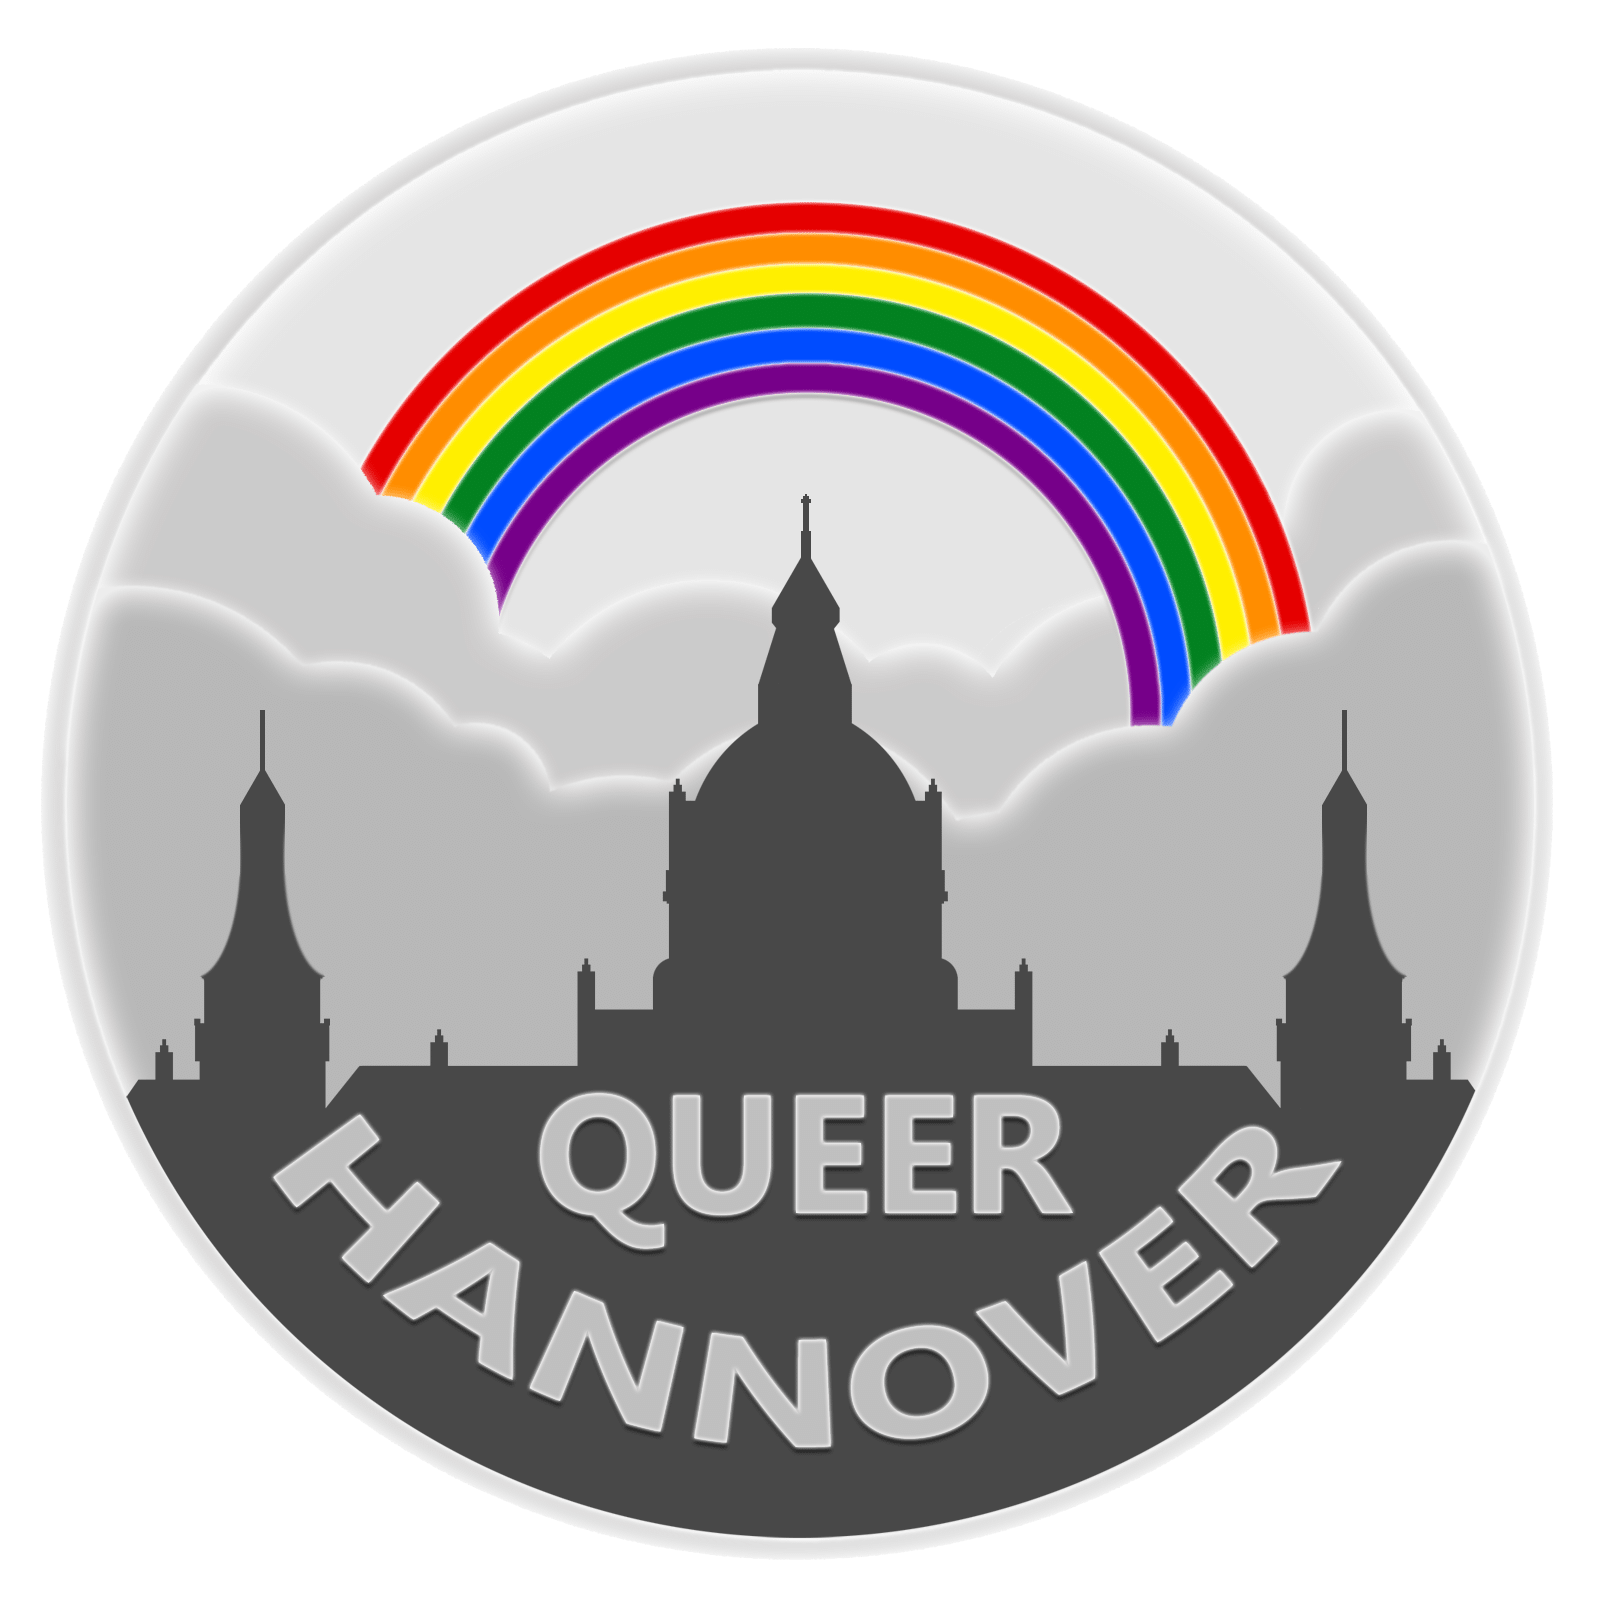 Queer Hannover